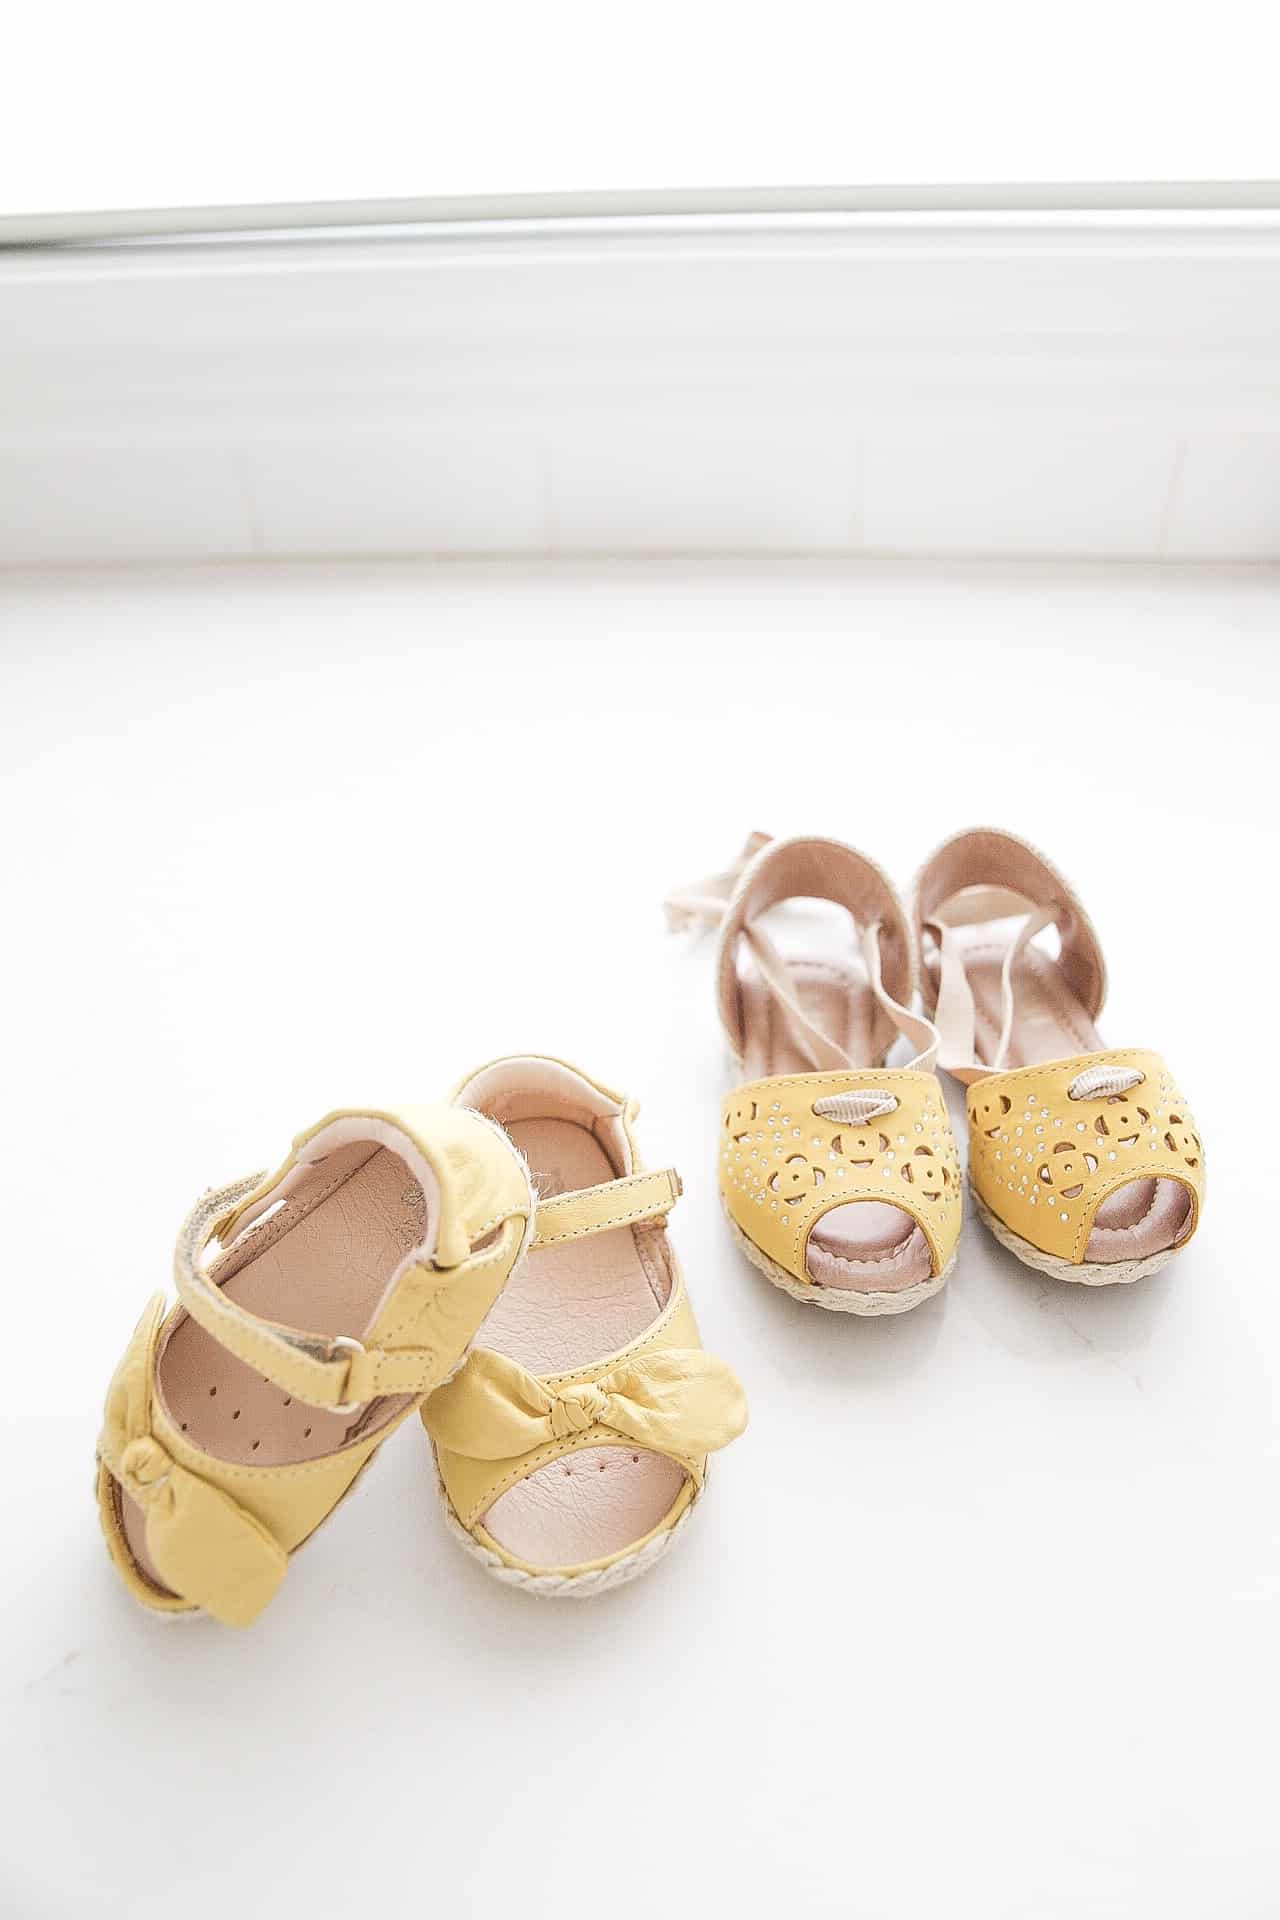 BABY SHOES AS DECOR? YOU’VE GOT TO TRY THIS!